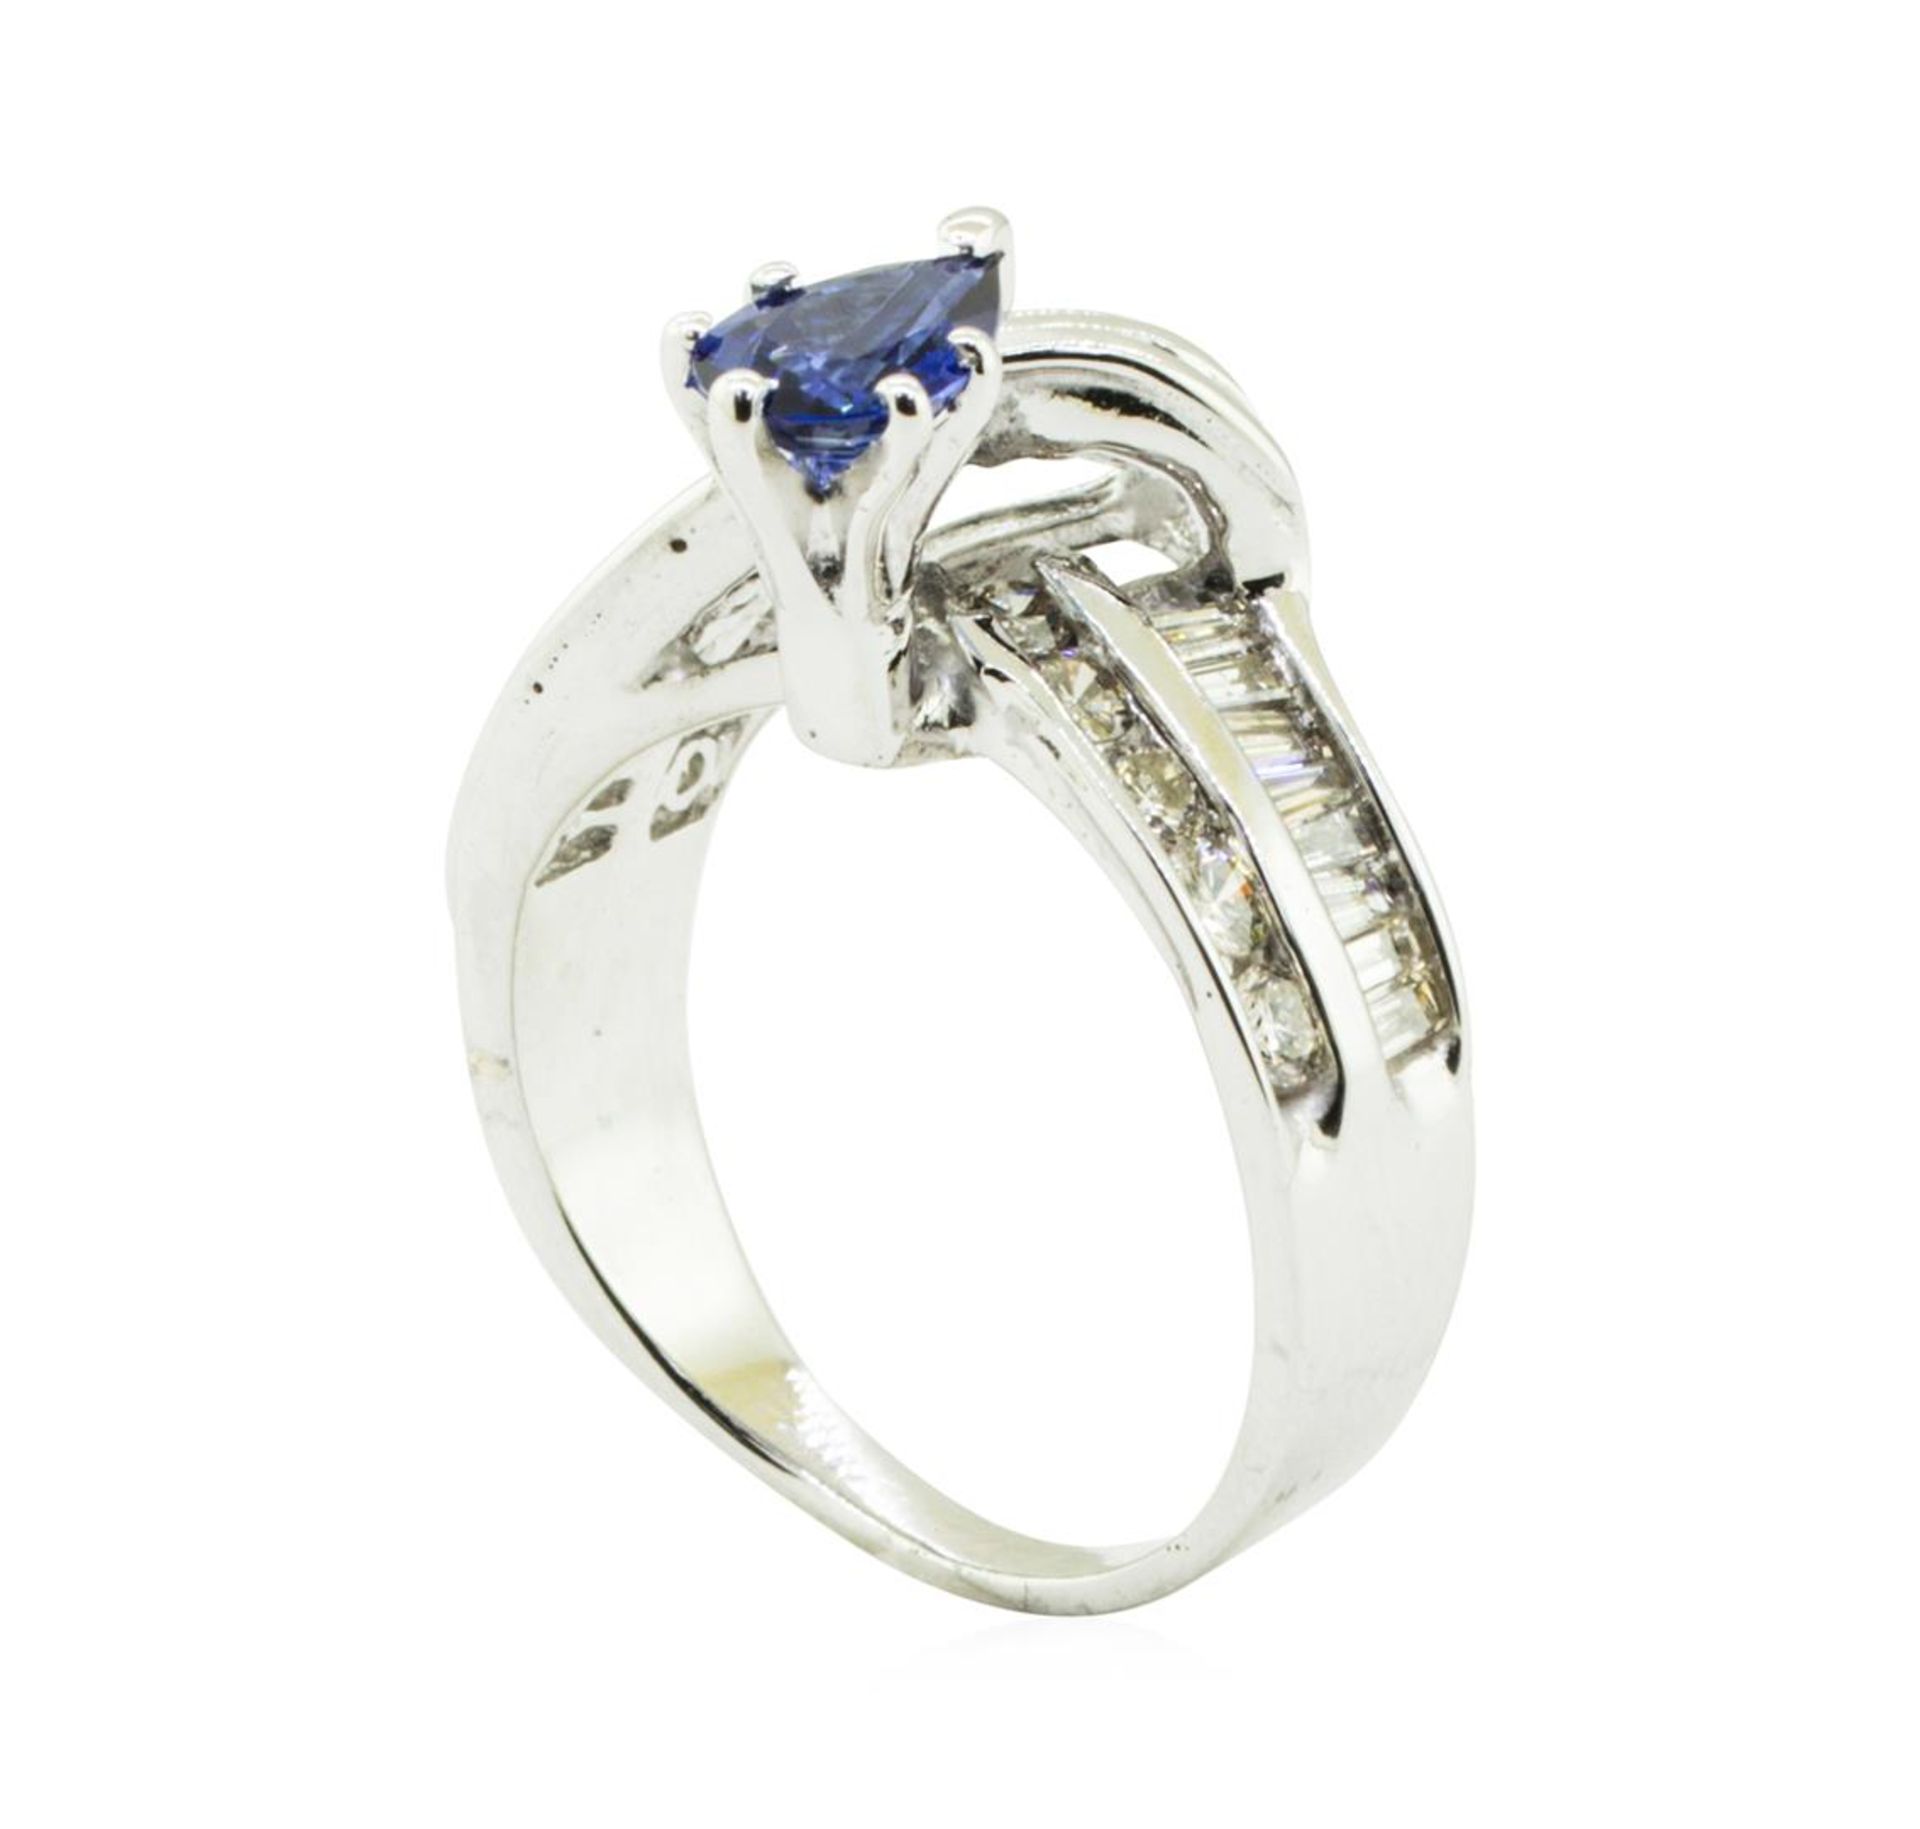 1.96 ctw Pear Brilliant Blue Sapphire And Diamond Ring - 14KT White Gold - Image 4 of 5